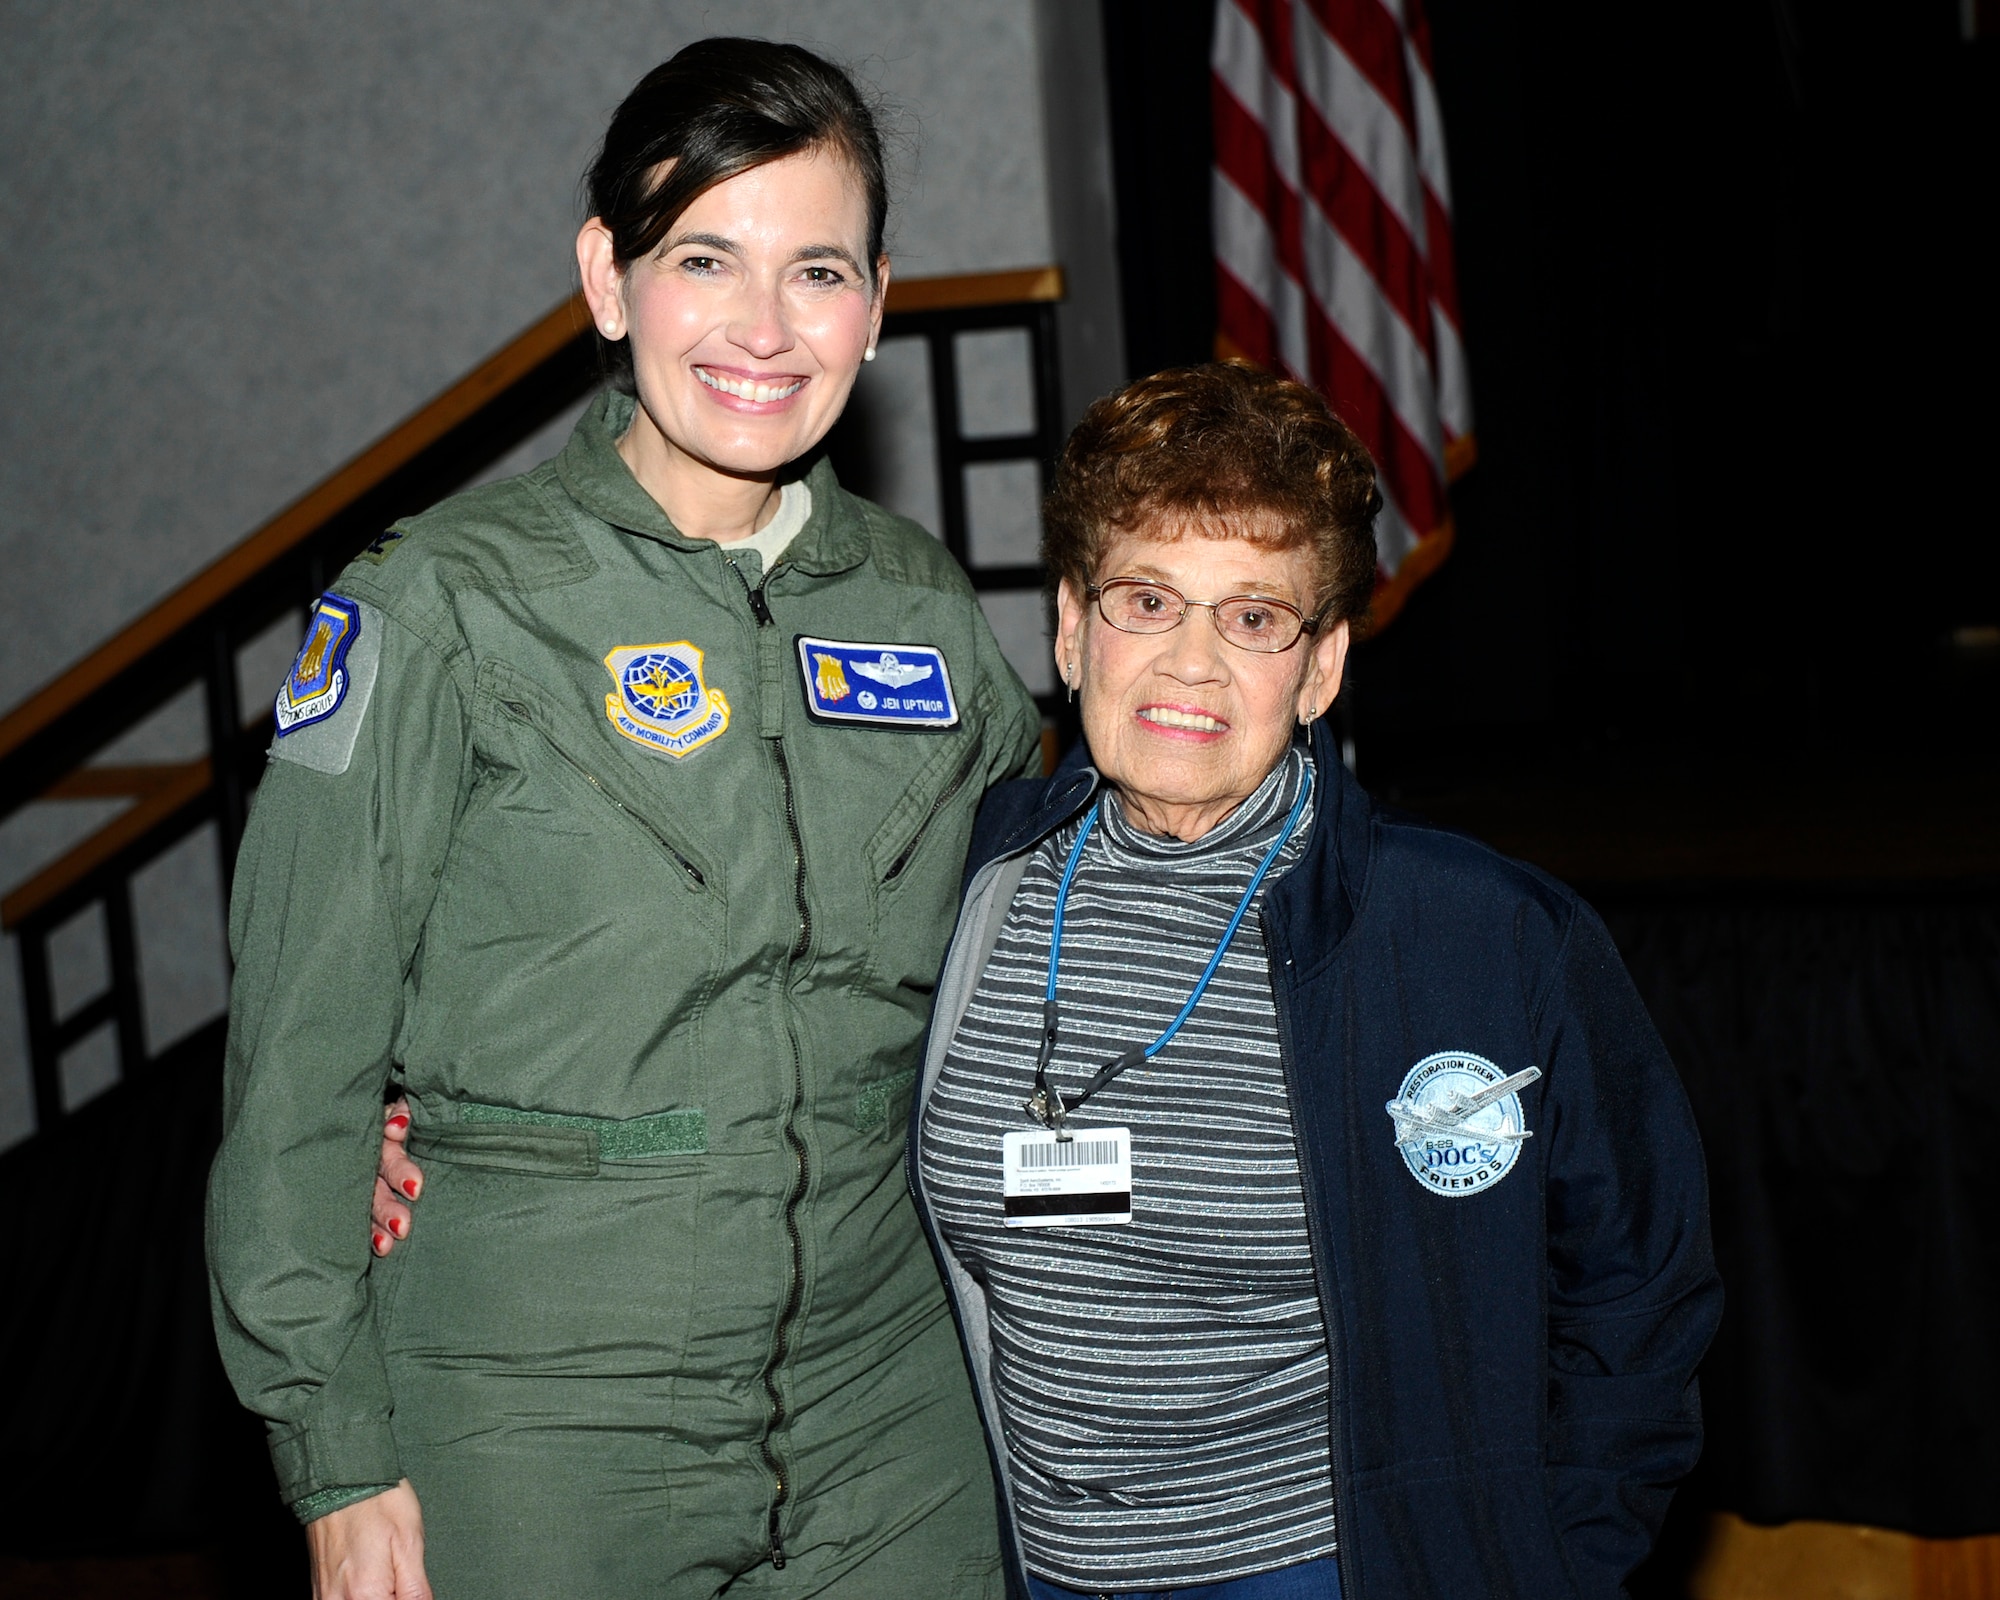 Col. Jennifer Uptmor, 22nd Air Refueling Wing Operations Group commander, and Connie Palacioz pose for a picture at McConnell's Women's History Month Luncheon March 27. Palacioz was honored for her contributions as a "Rosie the Riveter" for her work at a local Boeing B-29 plant from 1943 until 1945. (U.S. Air Force photo by Staff Sgt. Rachel Waller) 